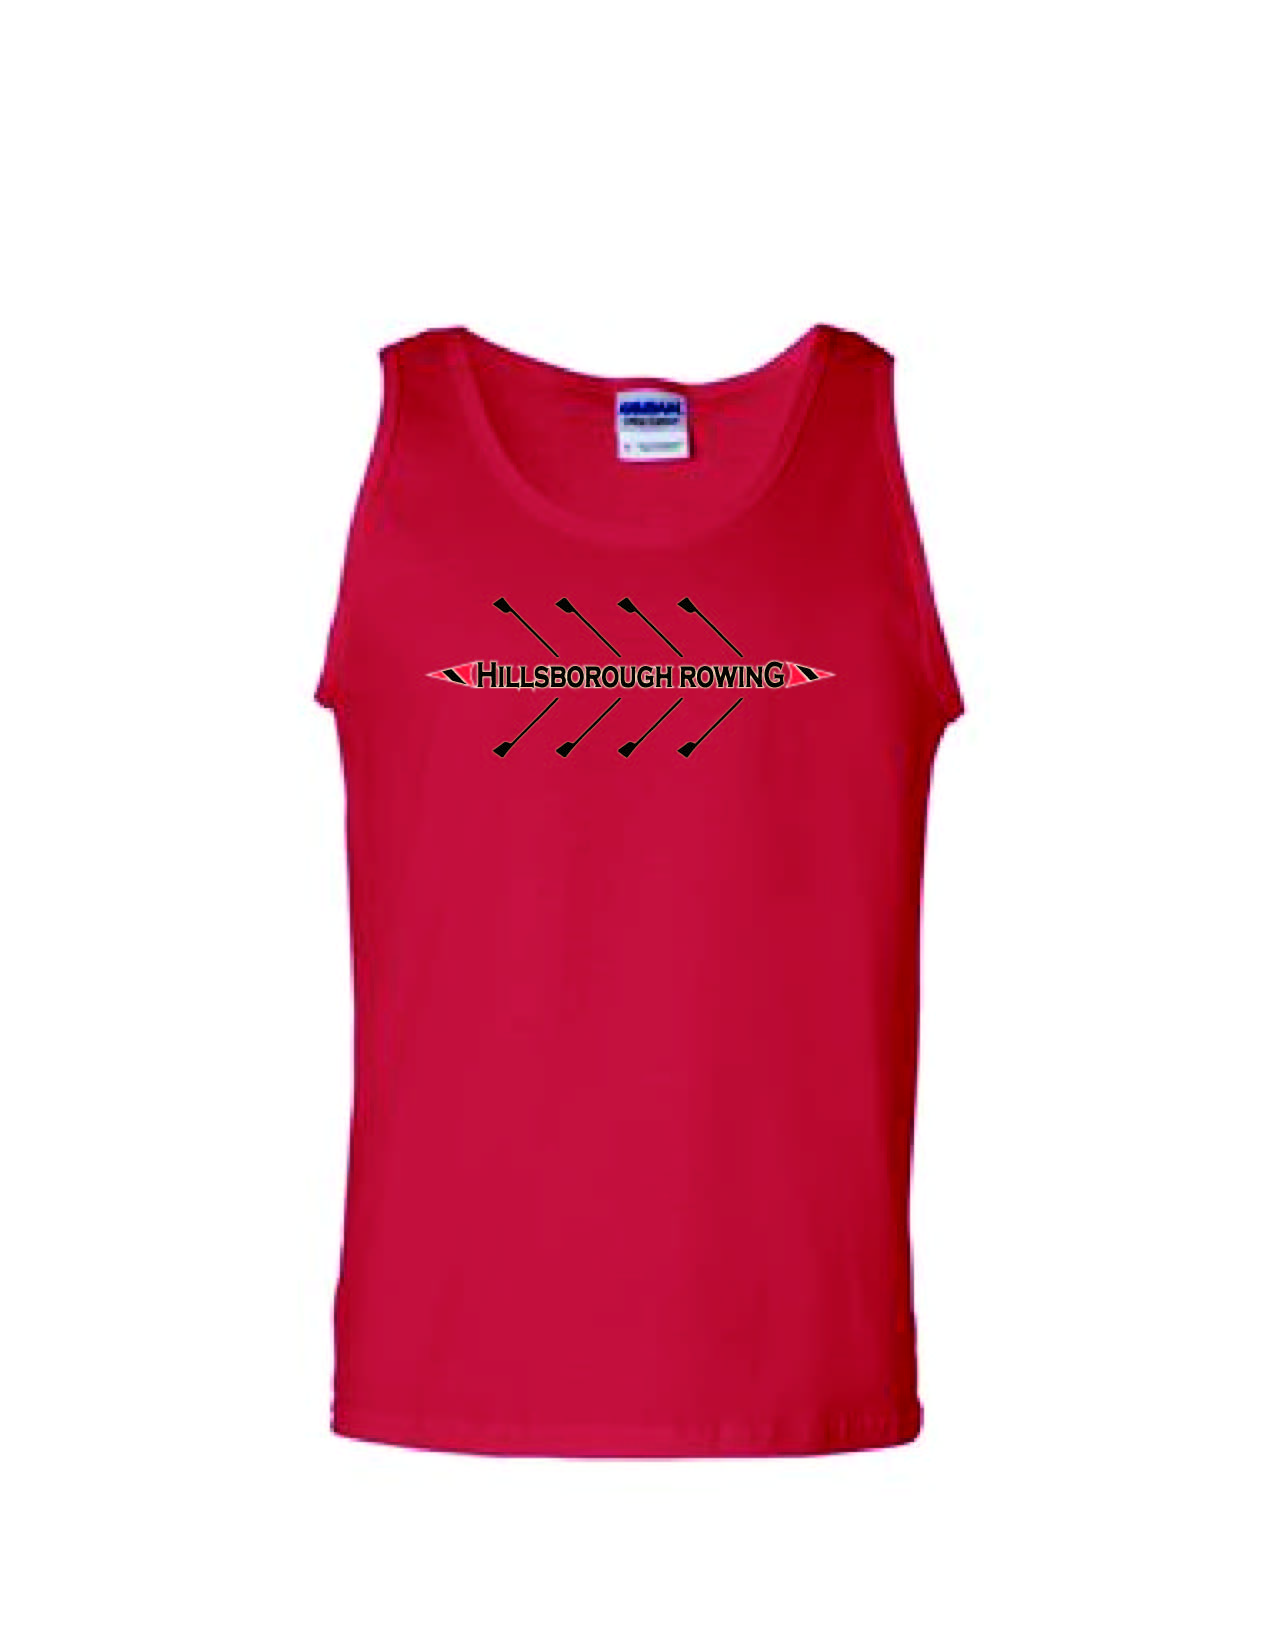 A1 - HHS Rowing Mens Tank Top